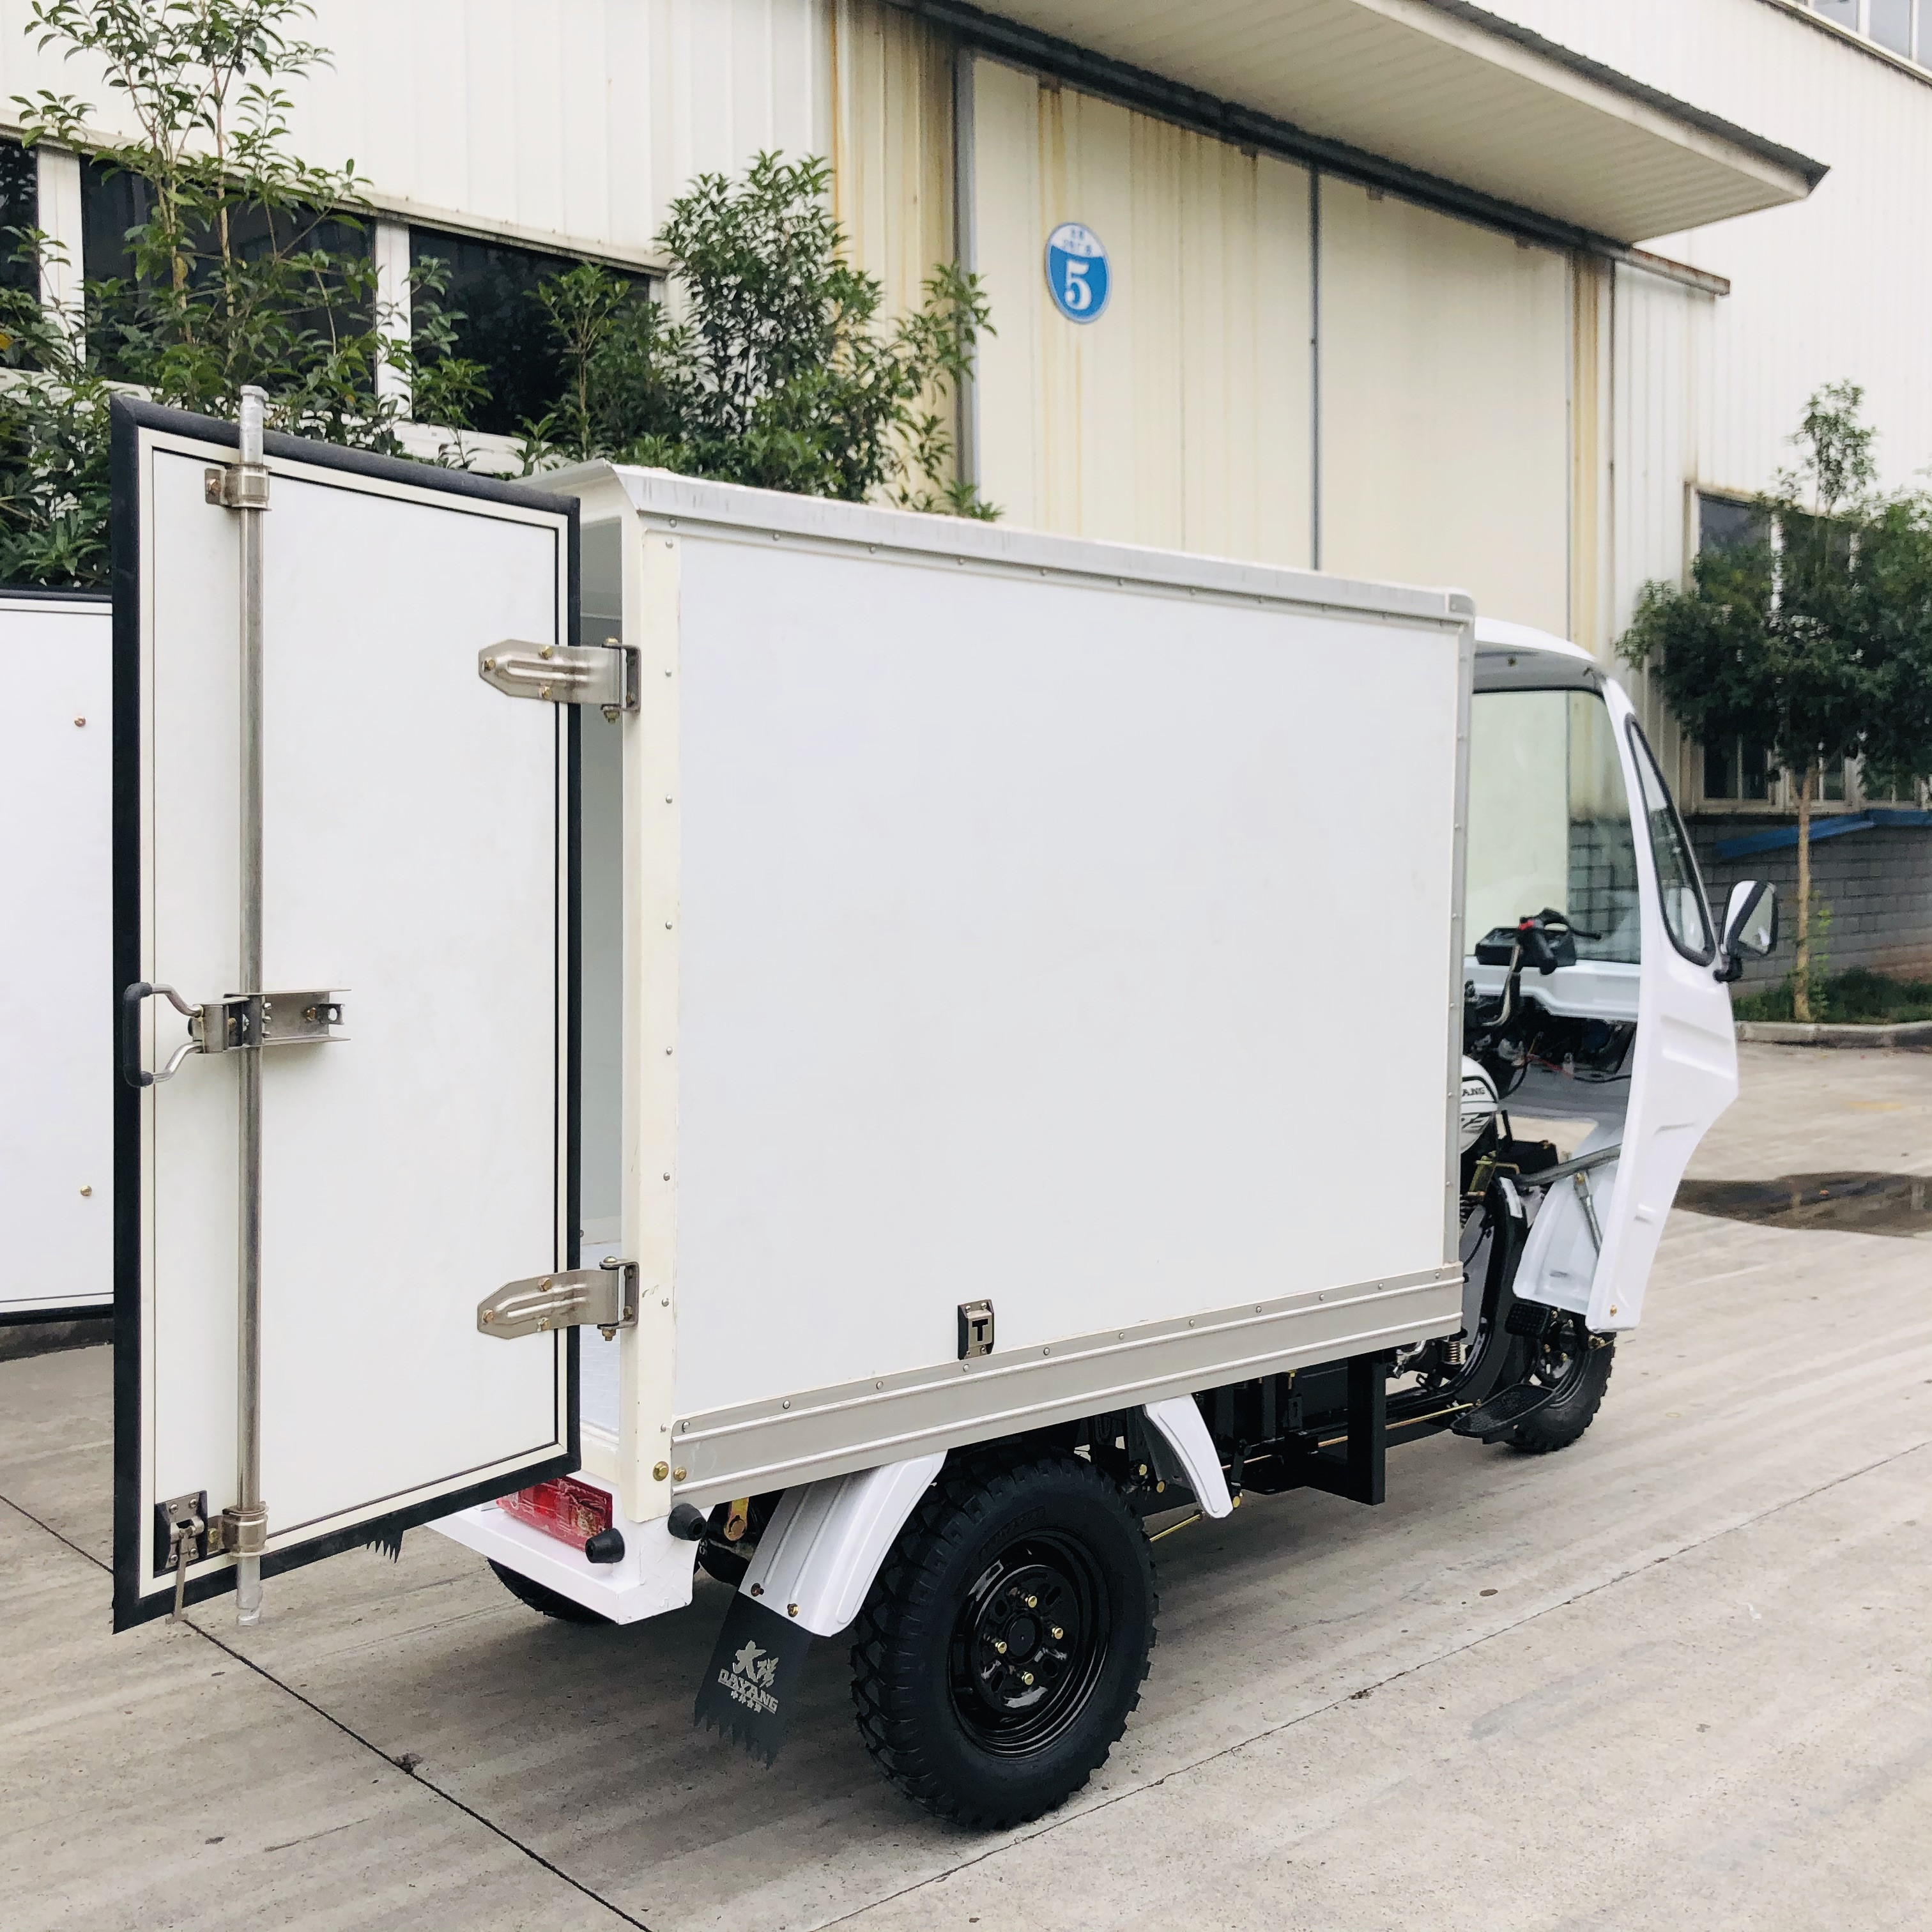 DY-B1 promotional mobile kitchen street food kiosk concession mobile bbq food trailer tricycle food cart